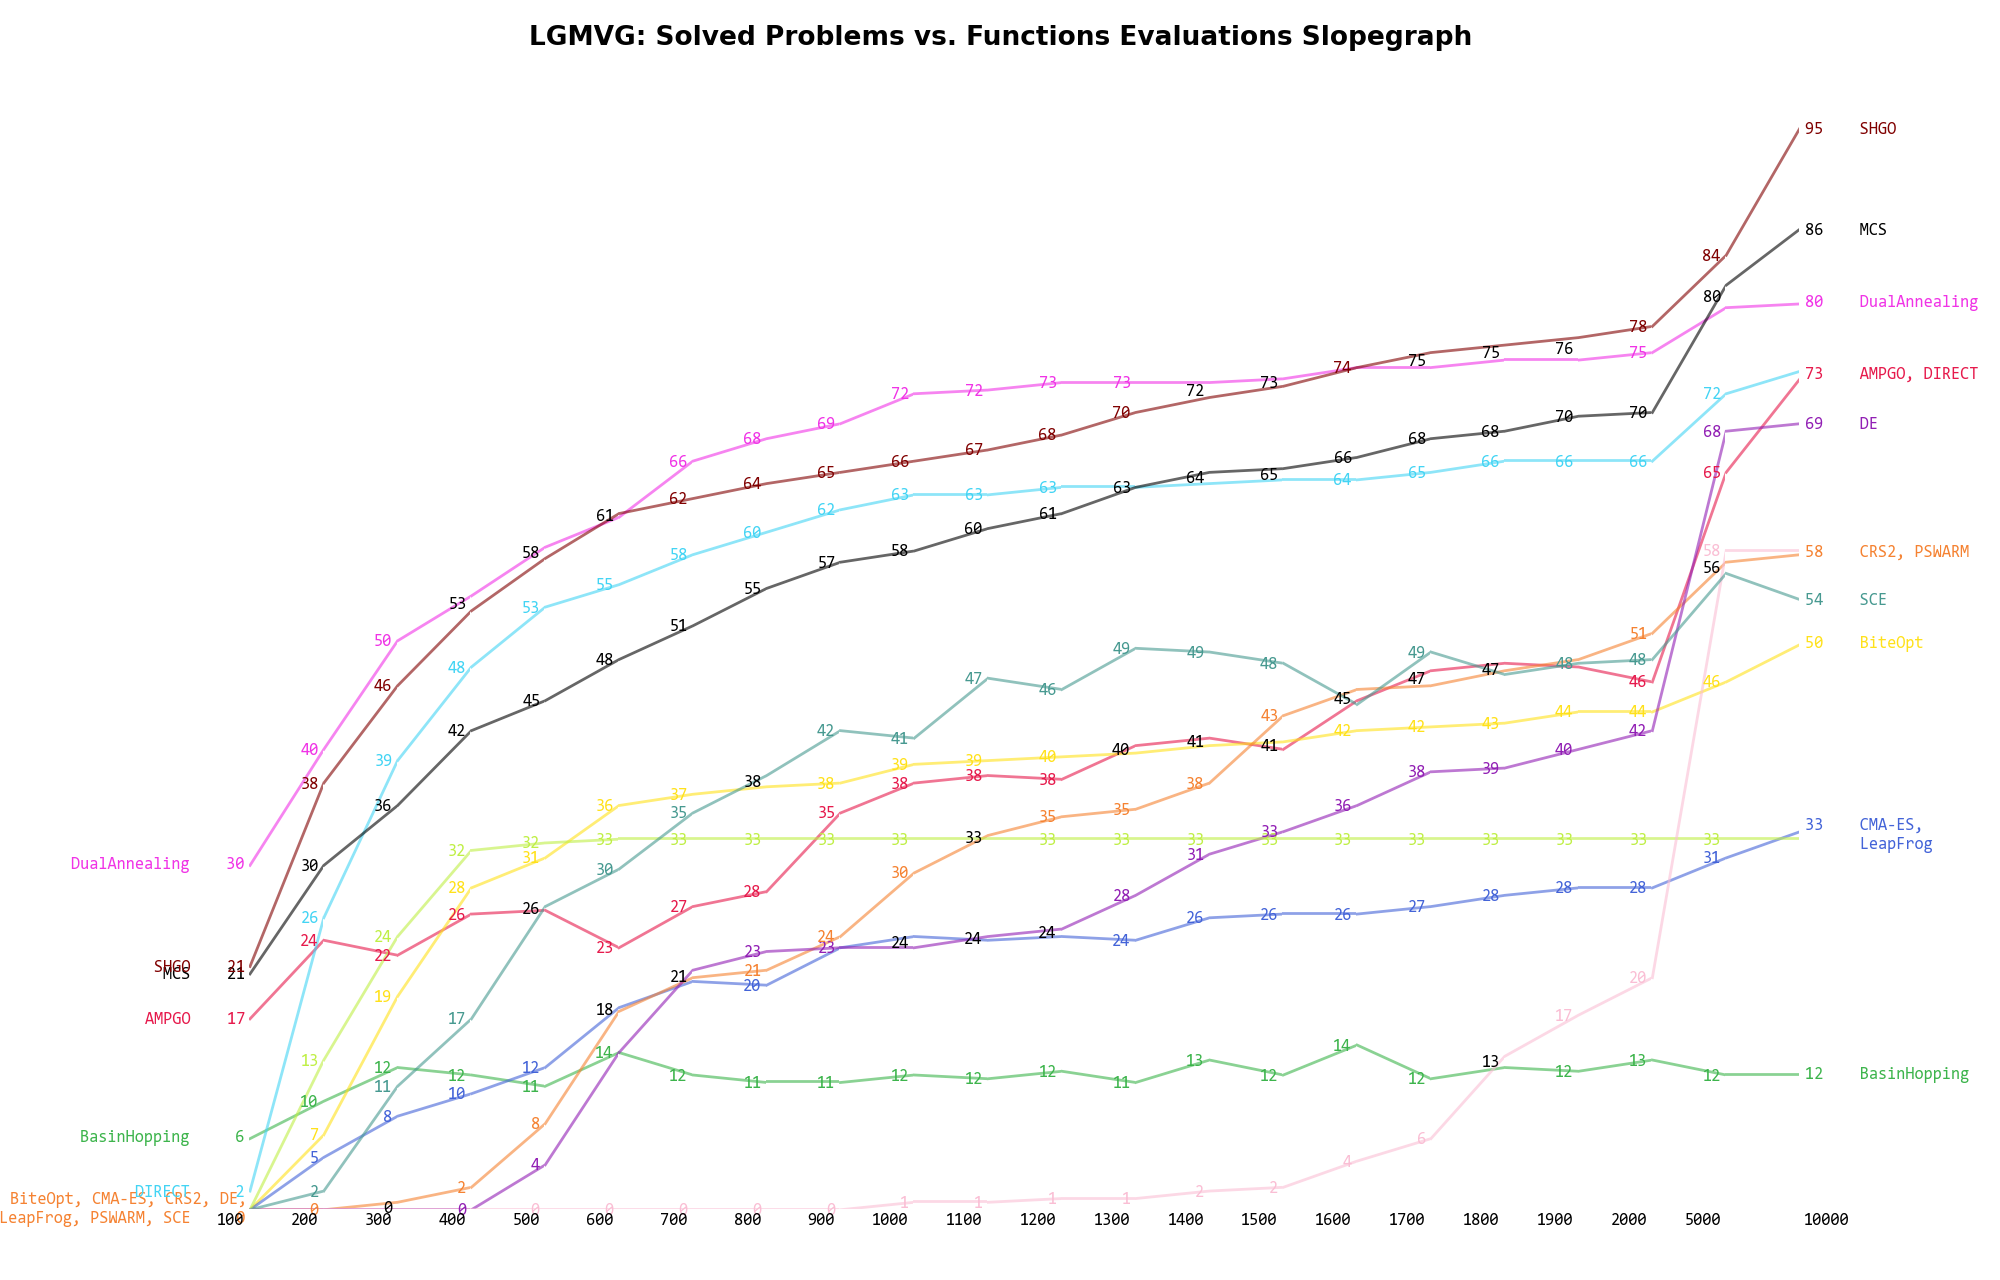 Percentage of problems solved given a fixed number of function evaluations on the LGMVG test suite